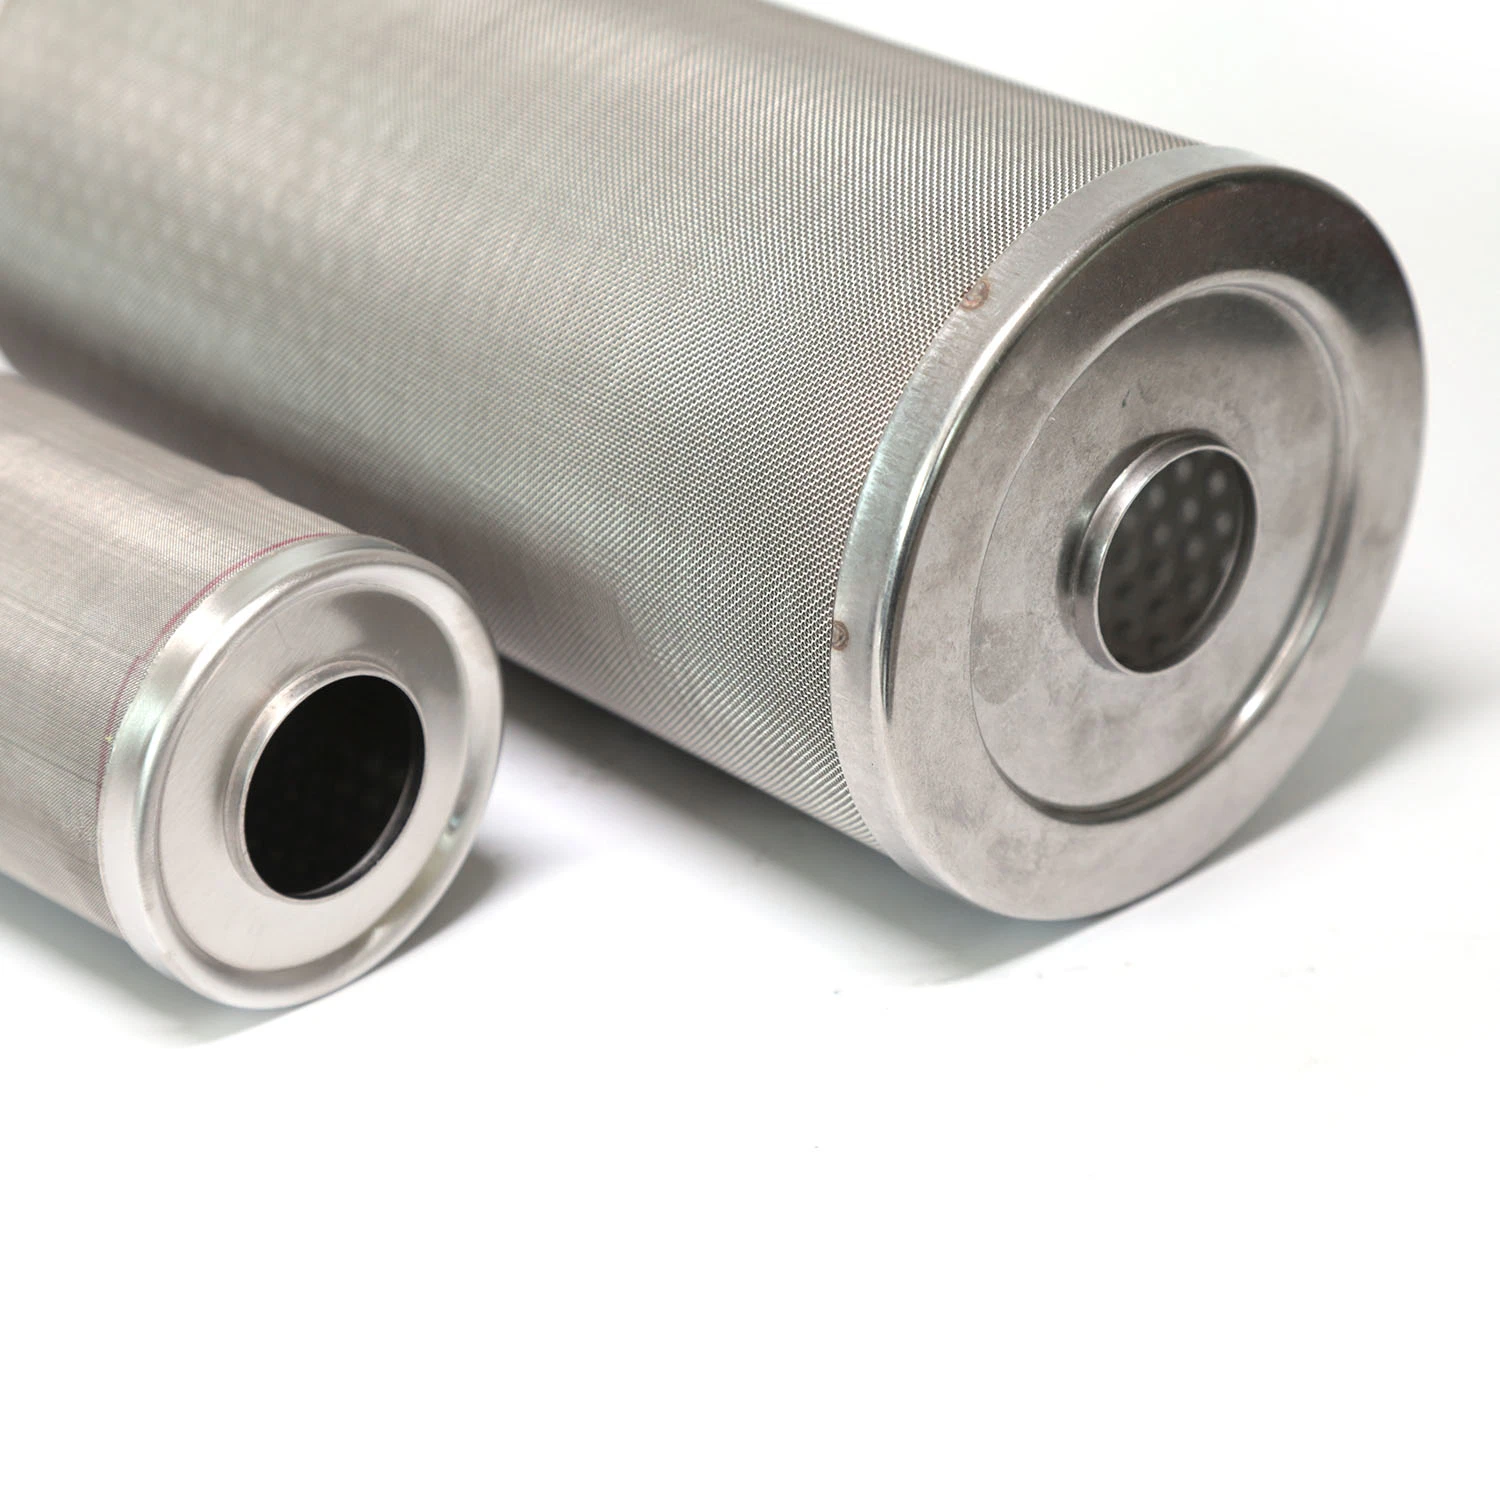 Customized Galvanized Filter Metal End Covers for Filter Elements